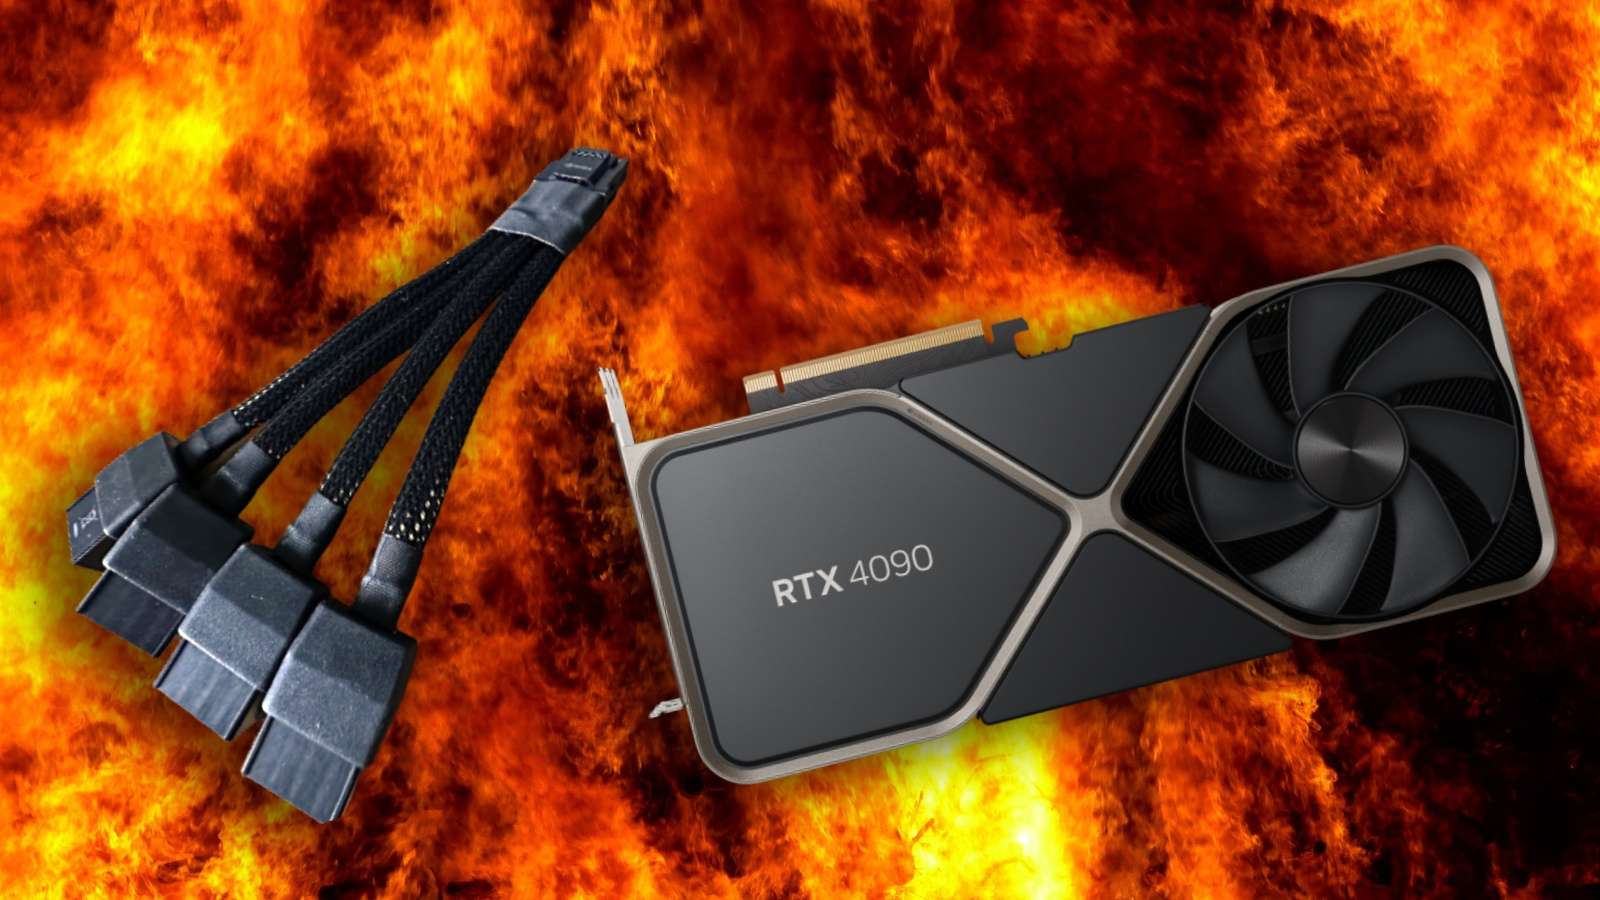 RTX 4090 Power adapter flames